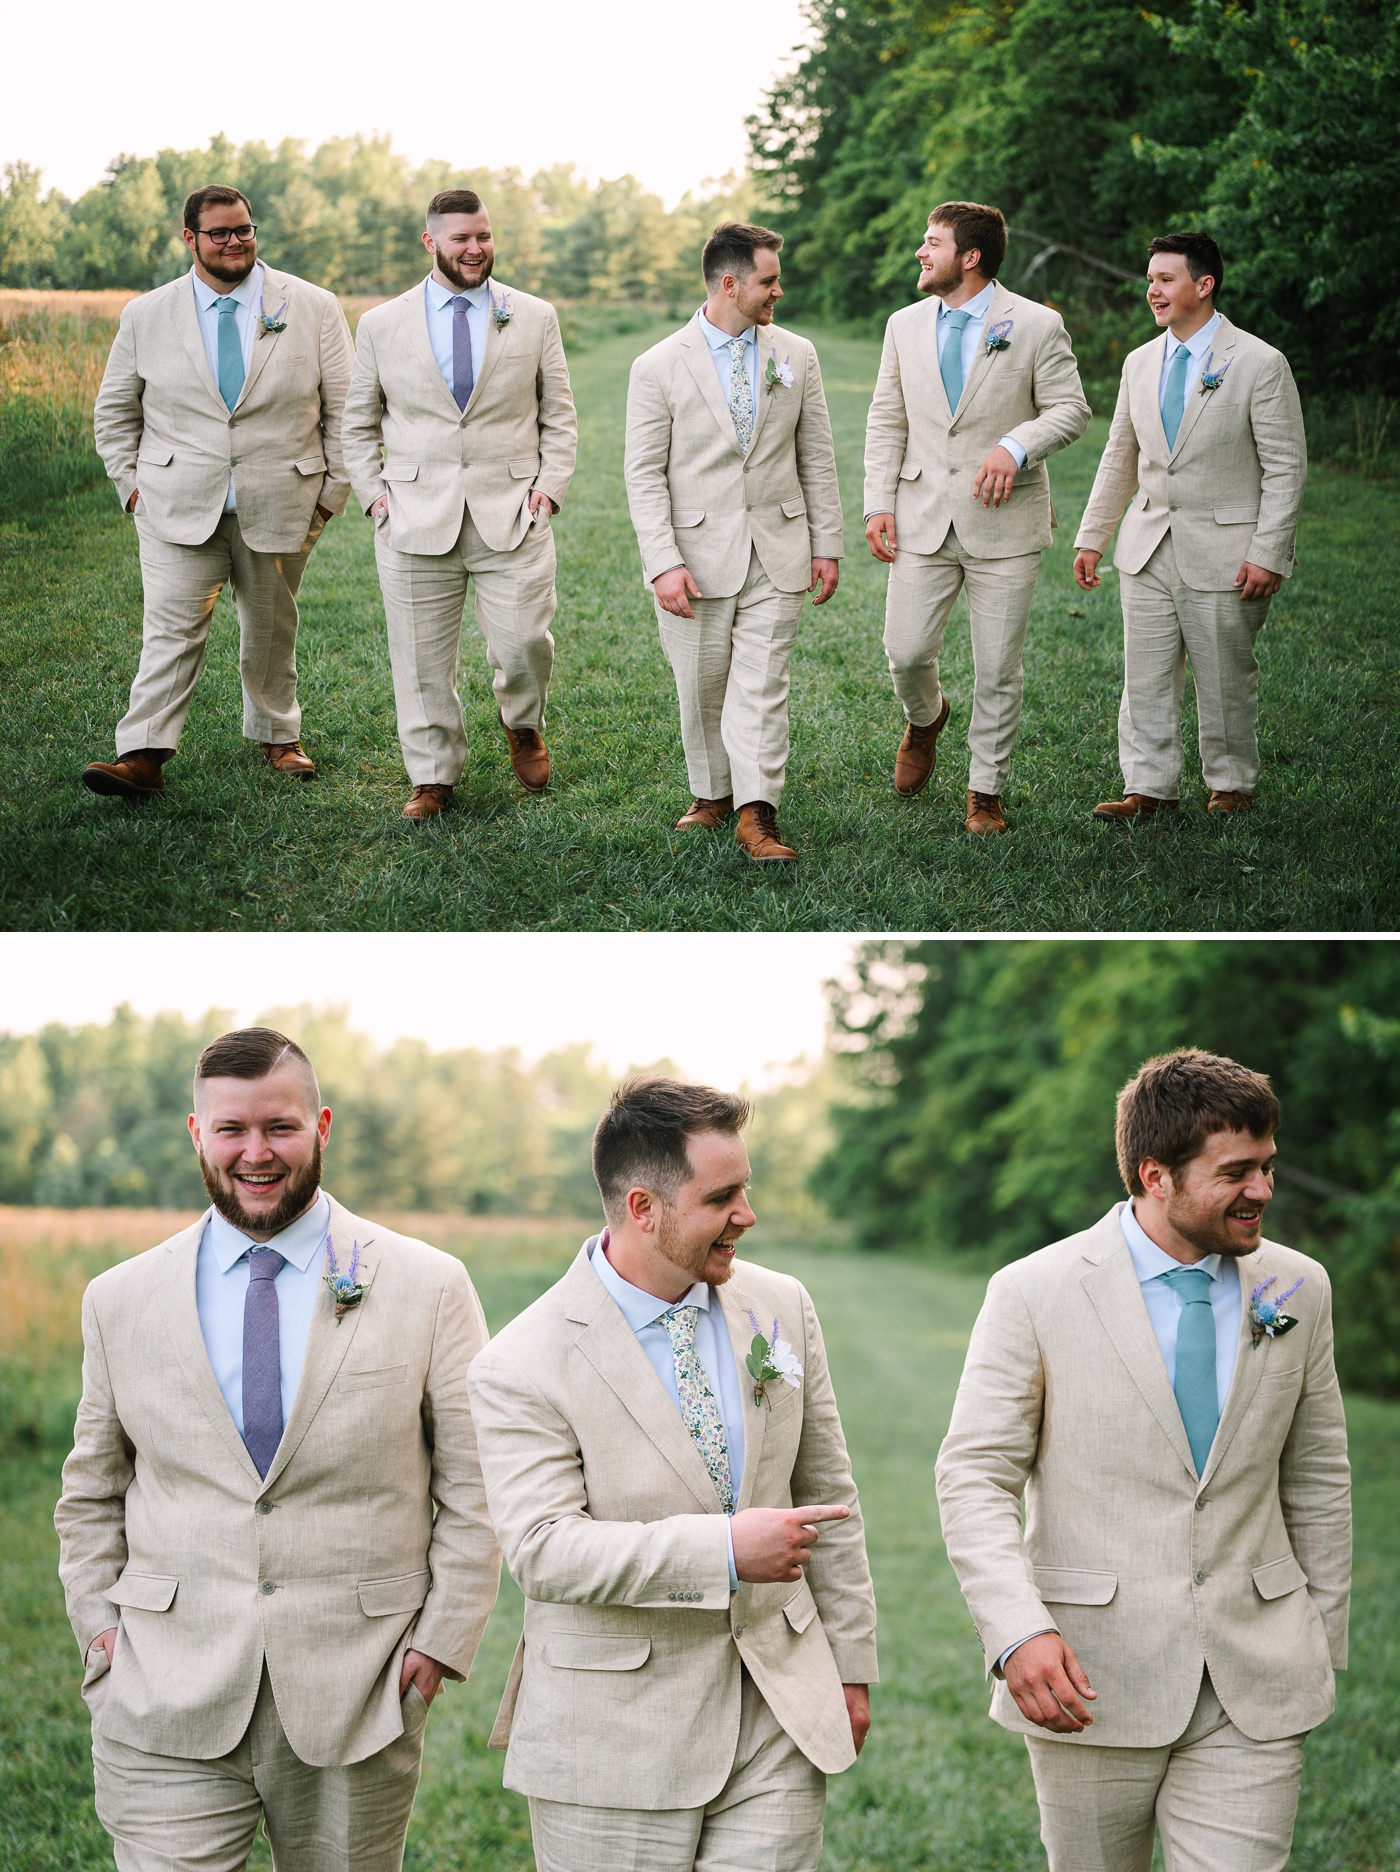 Bridal party portraits at Brown County State Park